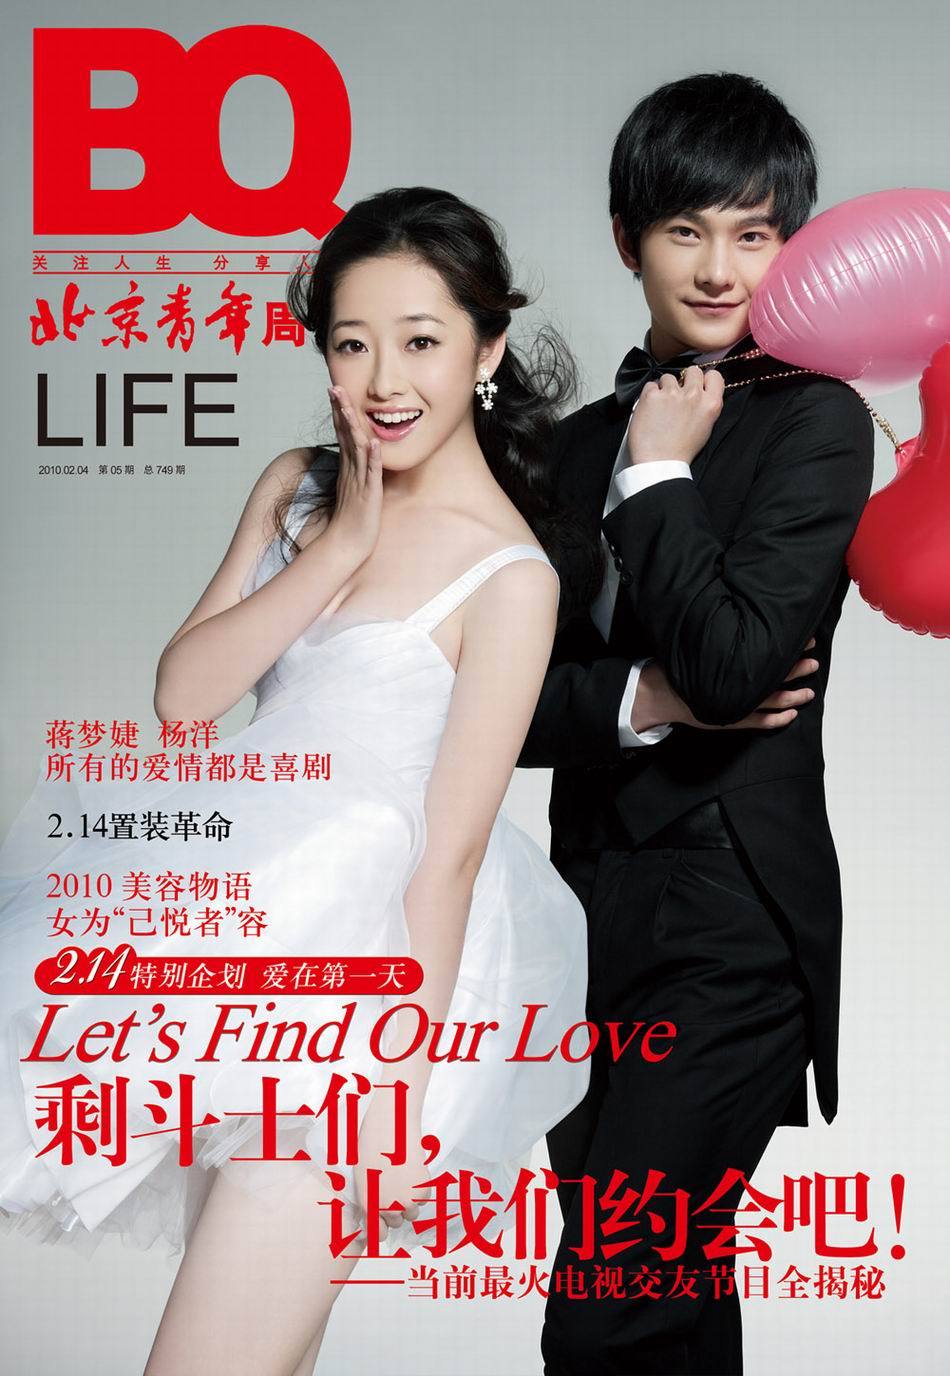 Leading actor Yang Yang (R) and actress Jiang Mengjie pose for a fashion magazine in Beijing